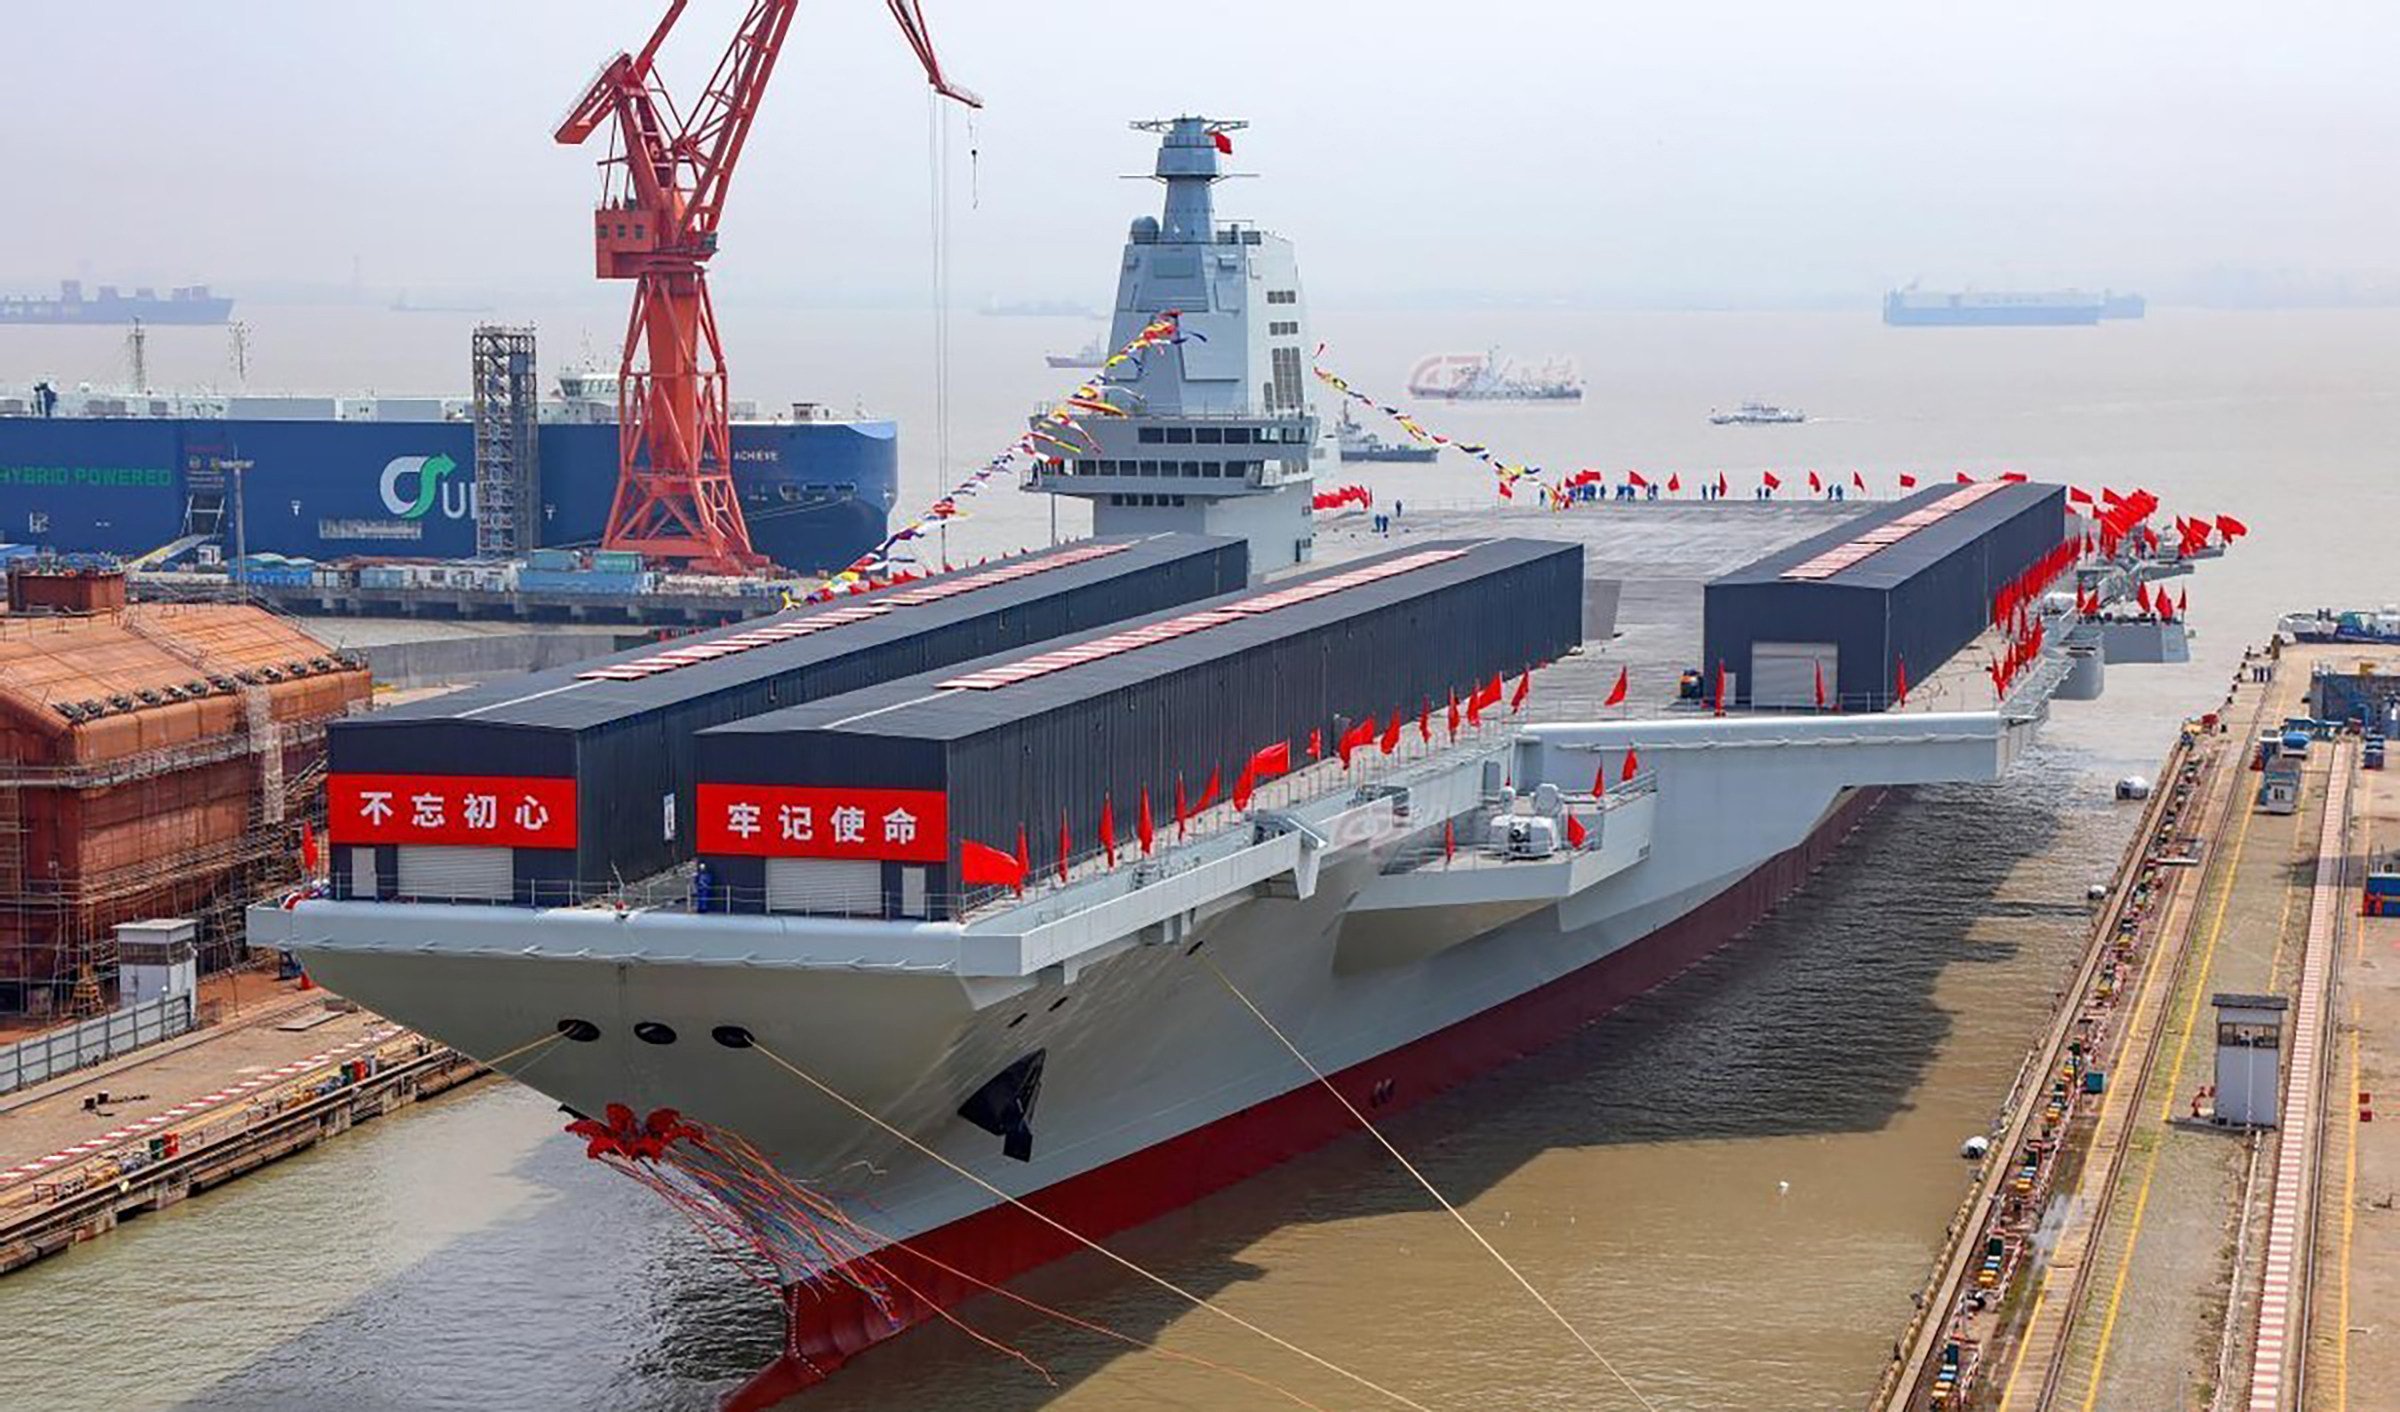 The Fujian is China’s first aircraft carrier to be equipped with electromagnetic catapults to launch planes from its deck. Photo: Weibo